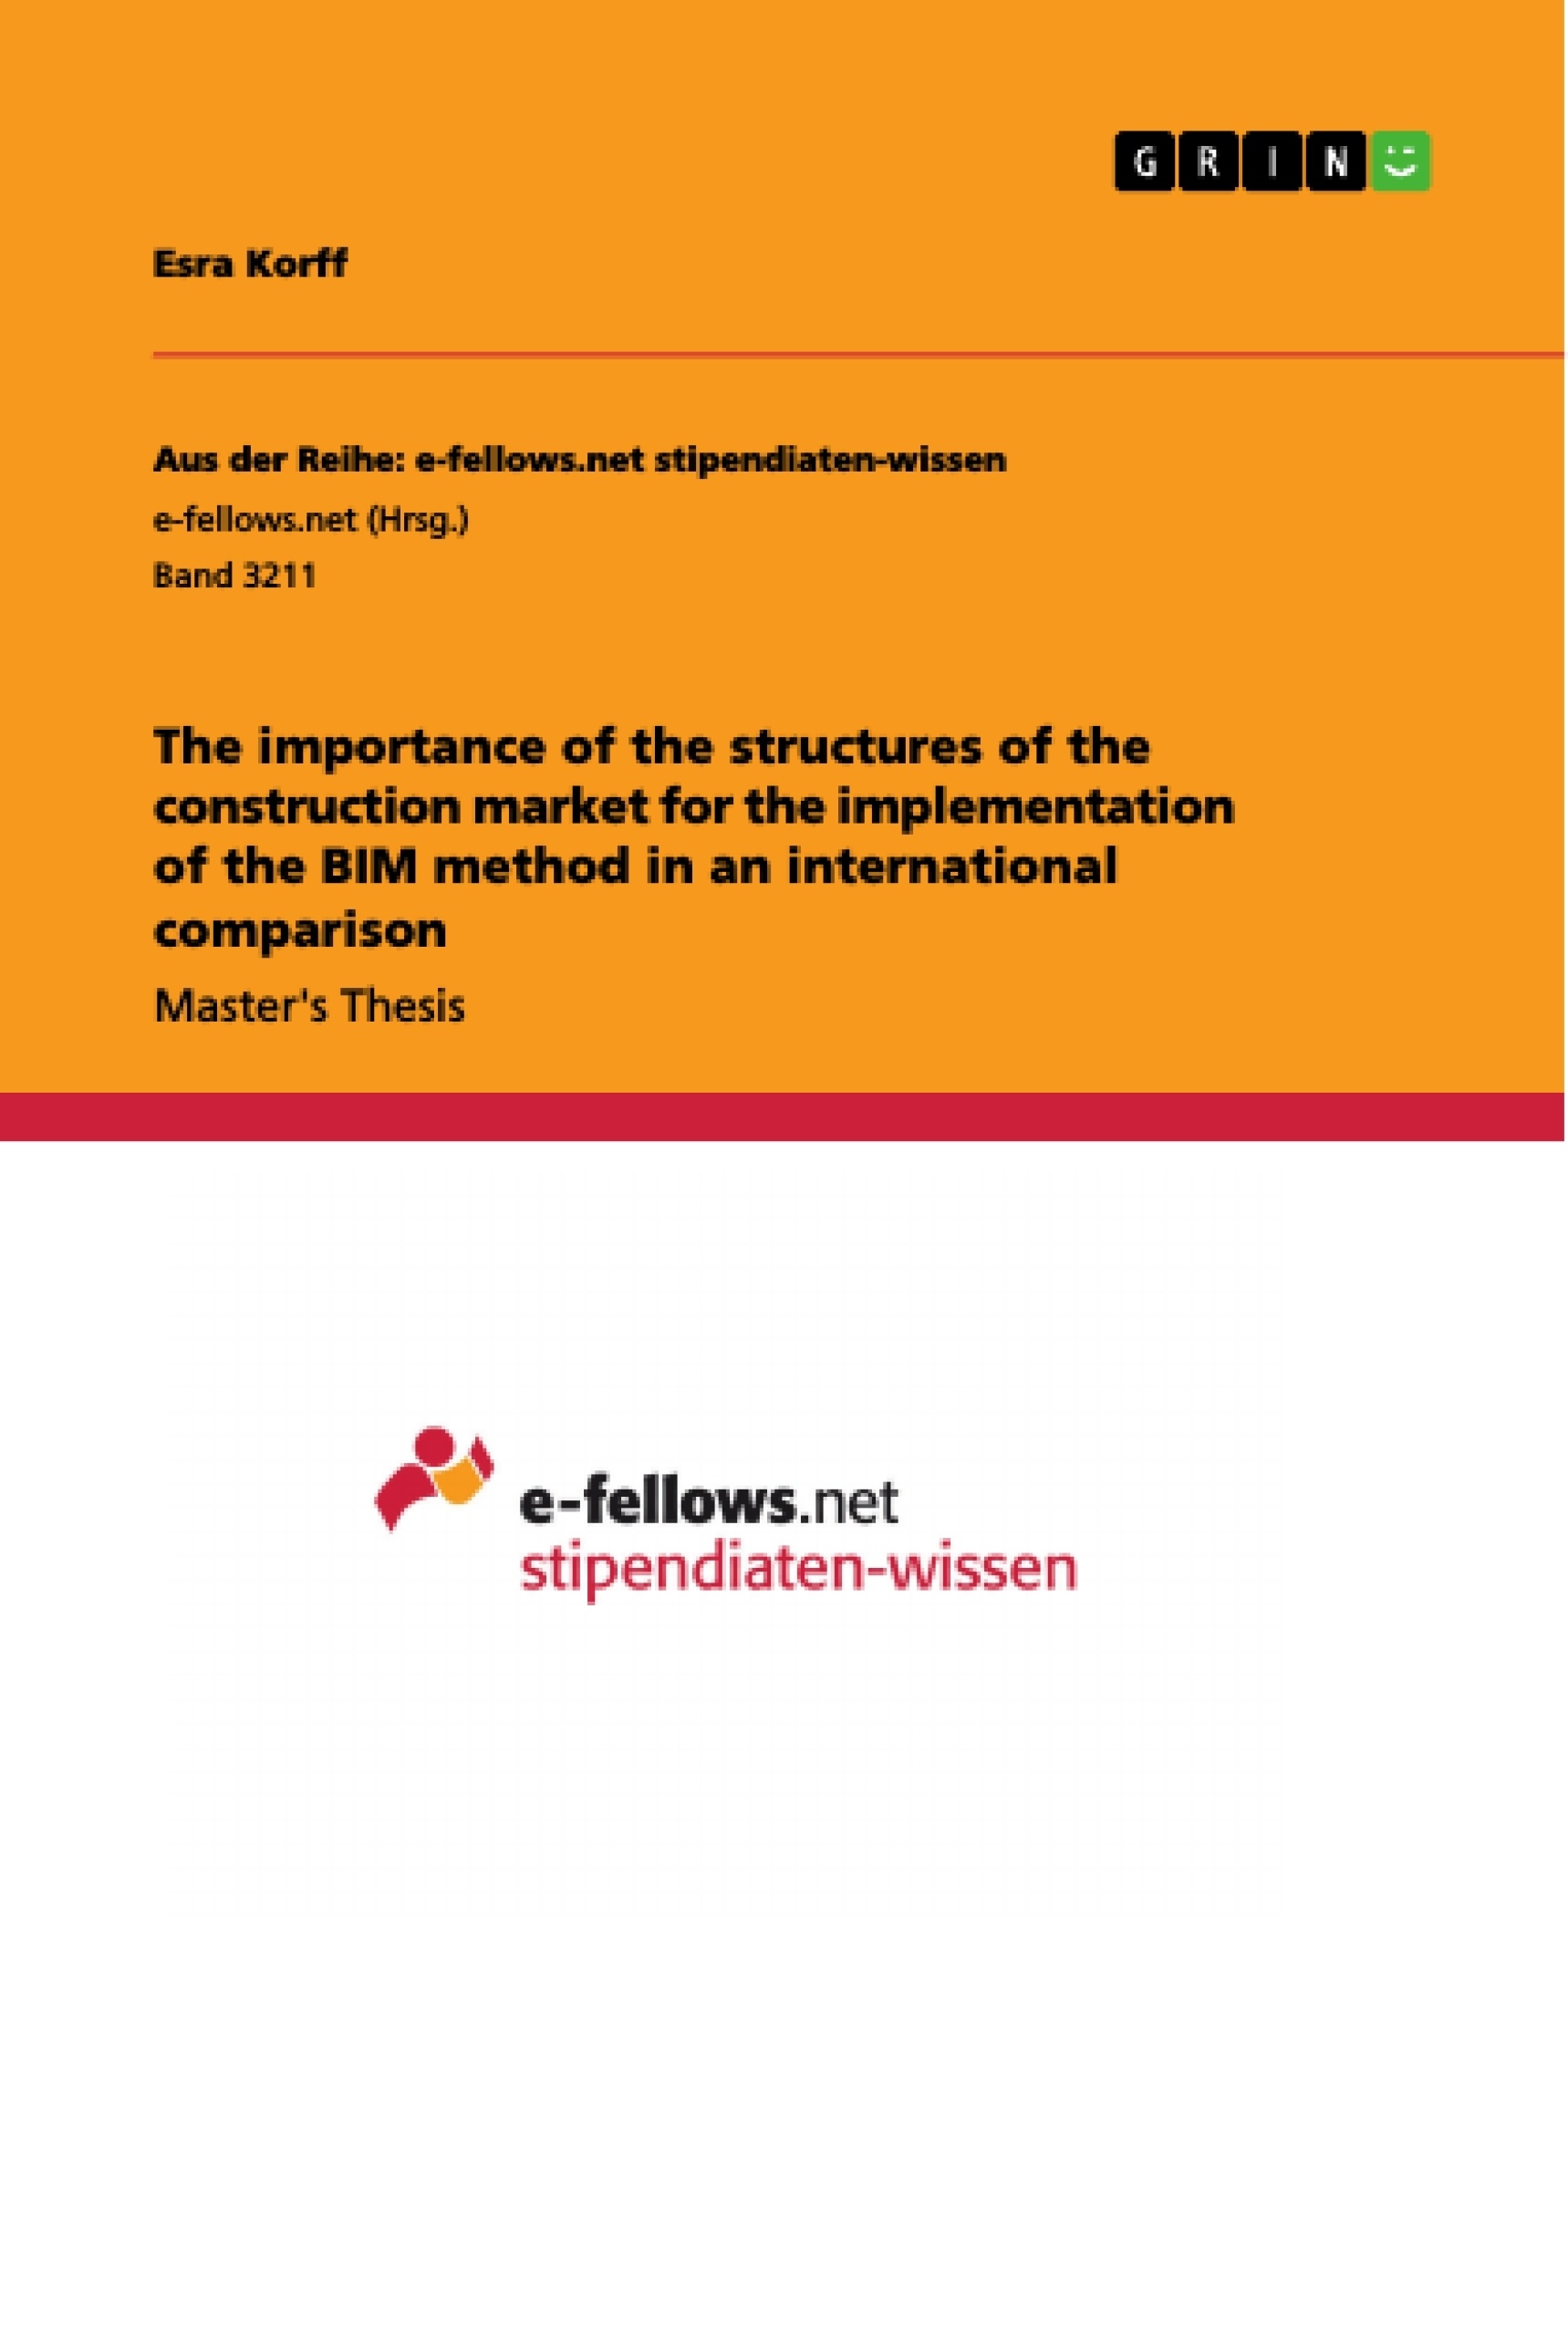 Title: The importance of the structures of the construction market for the implementation of the BIM method in an international comparison